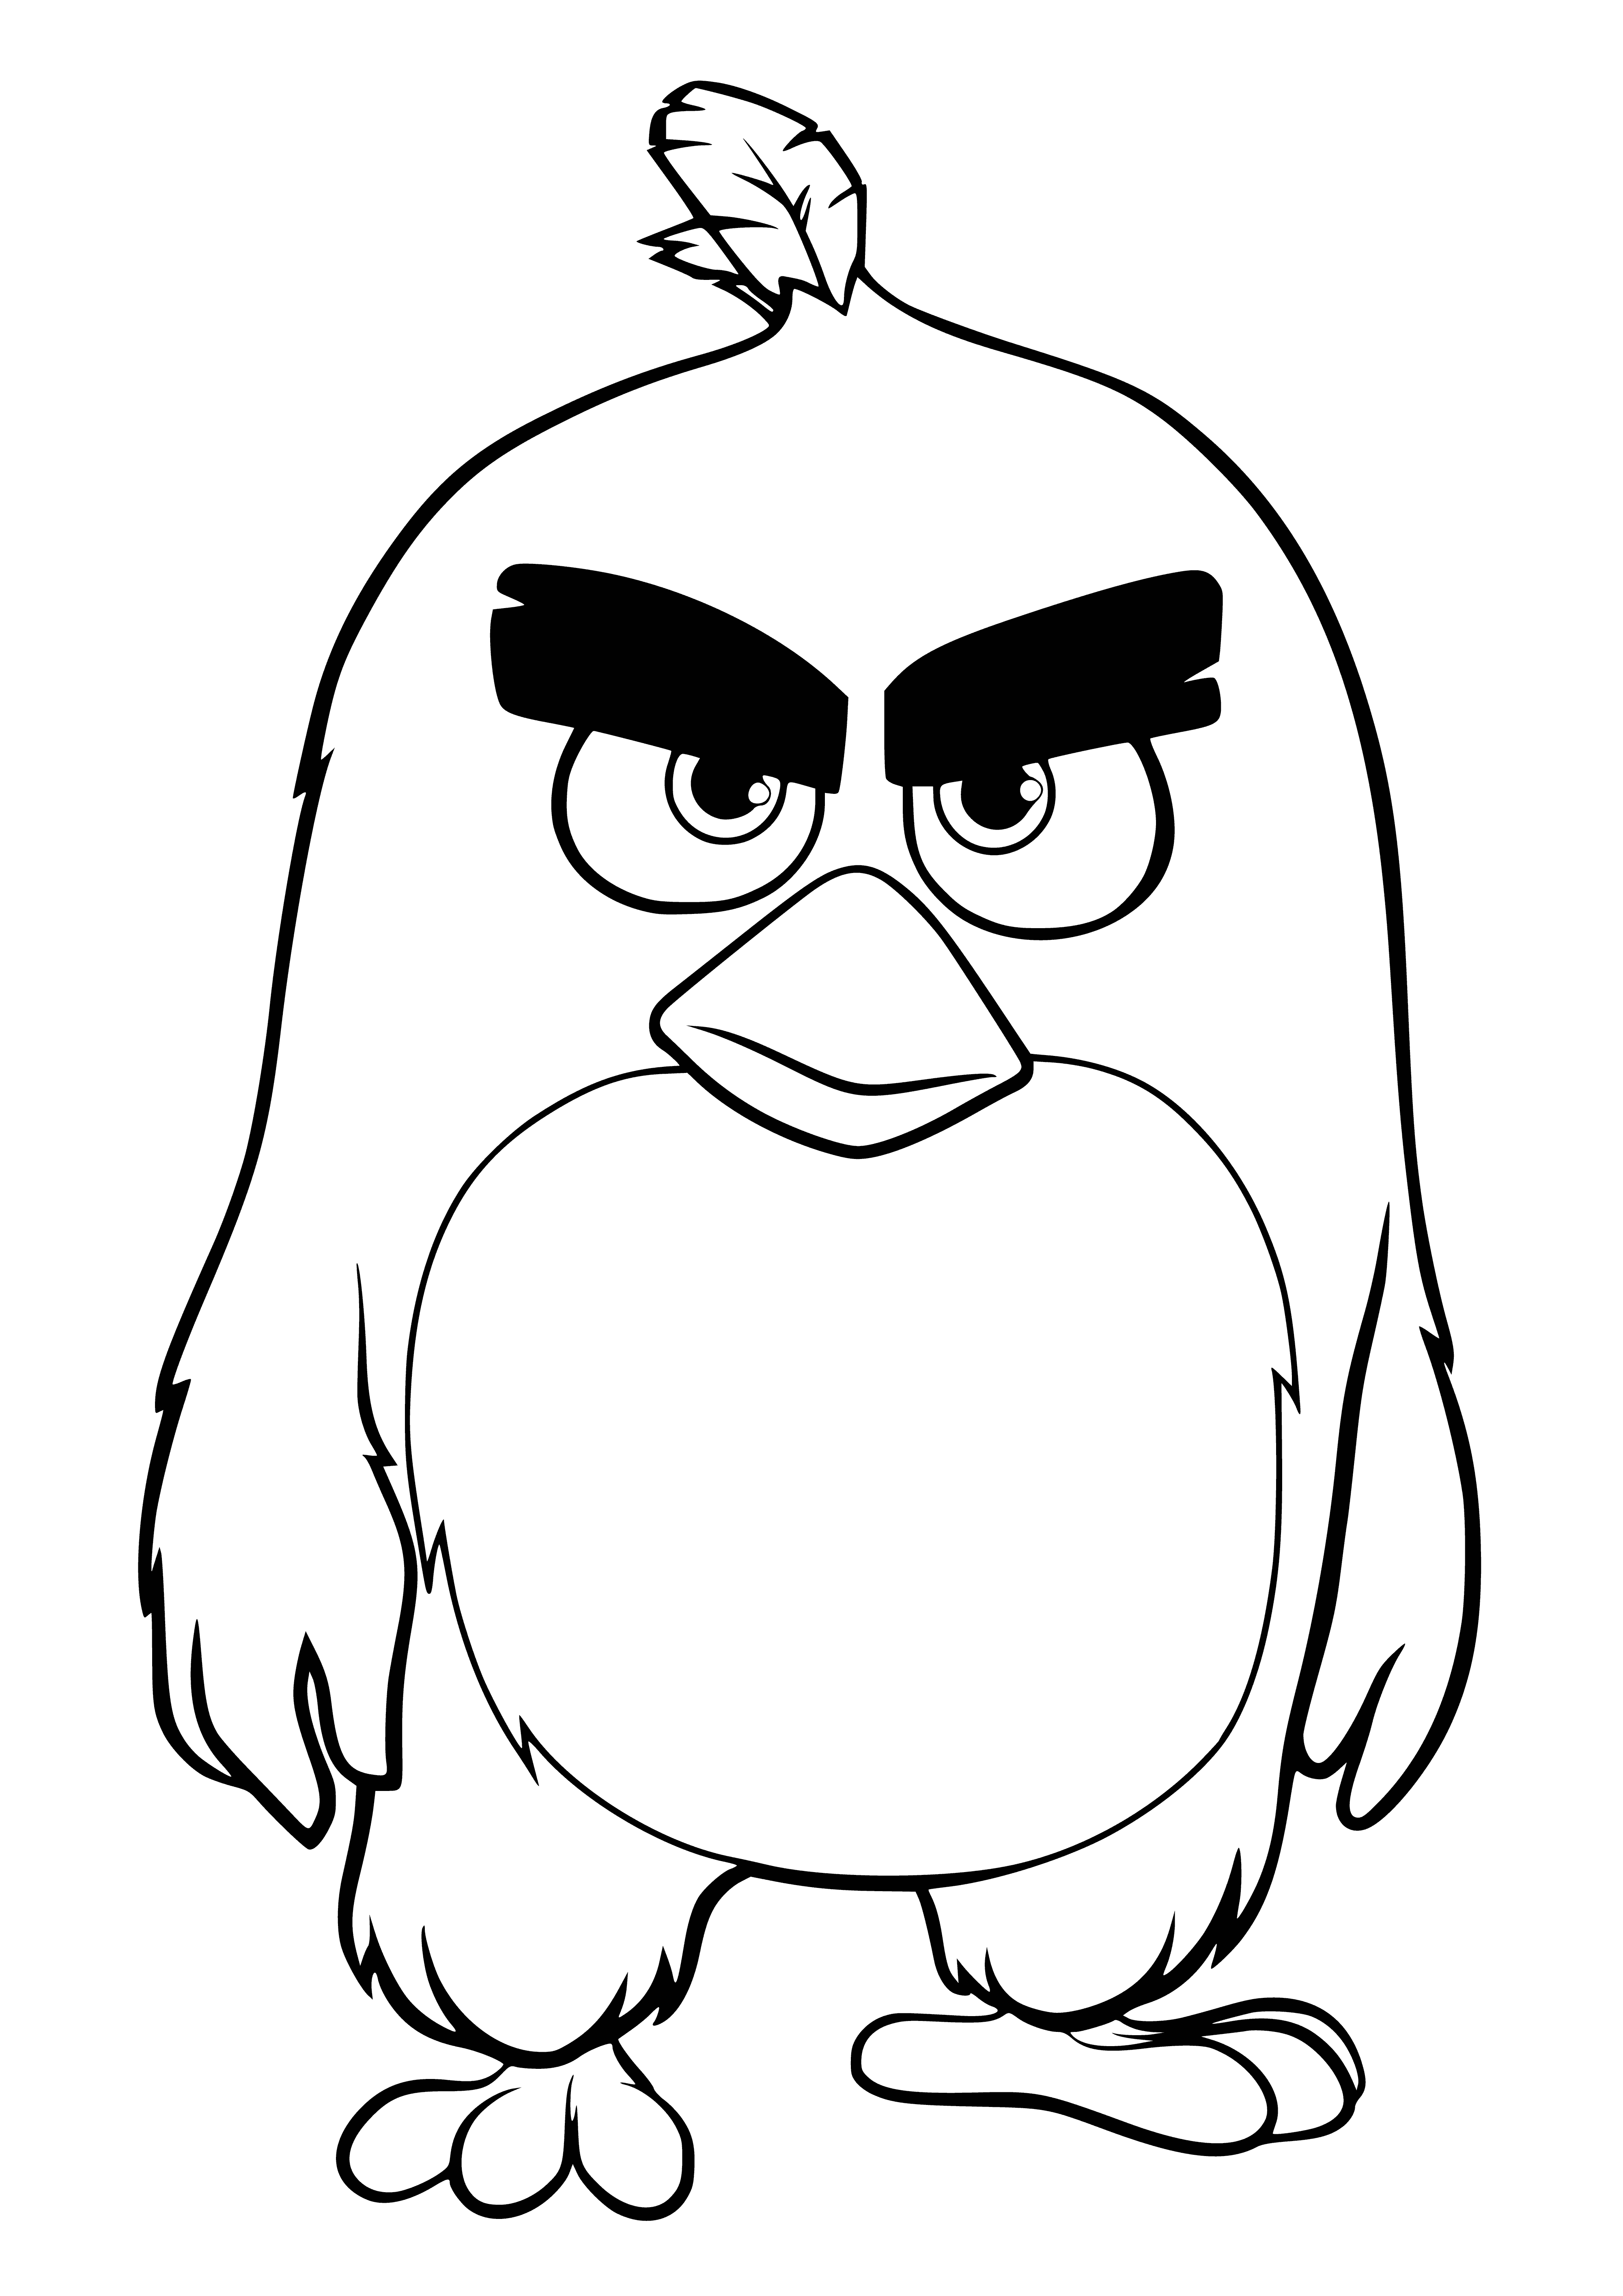 Ed coloring page